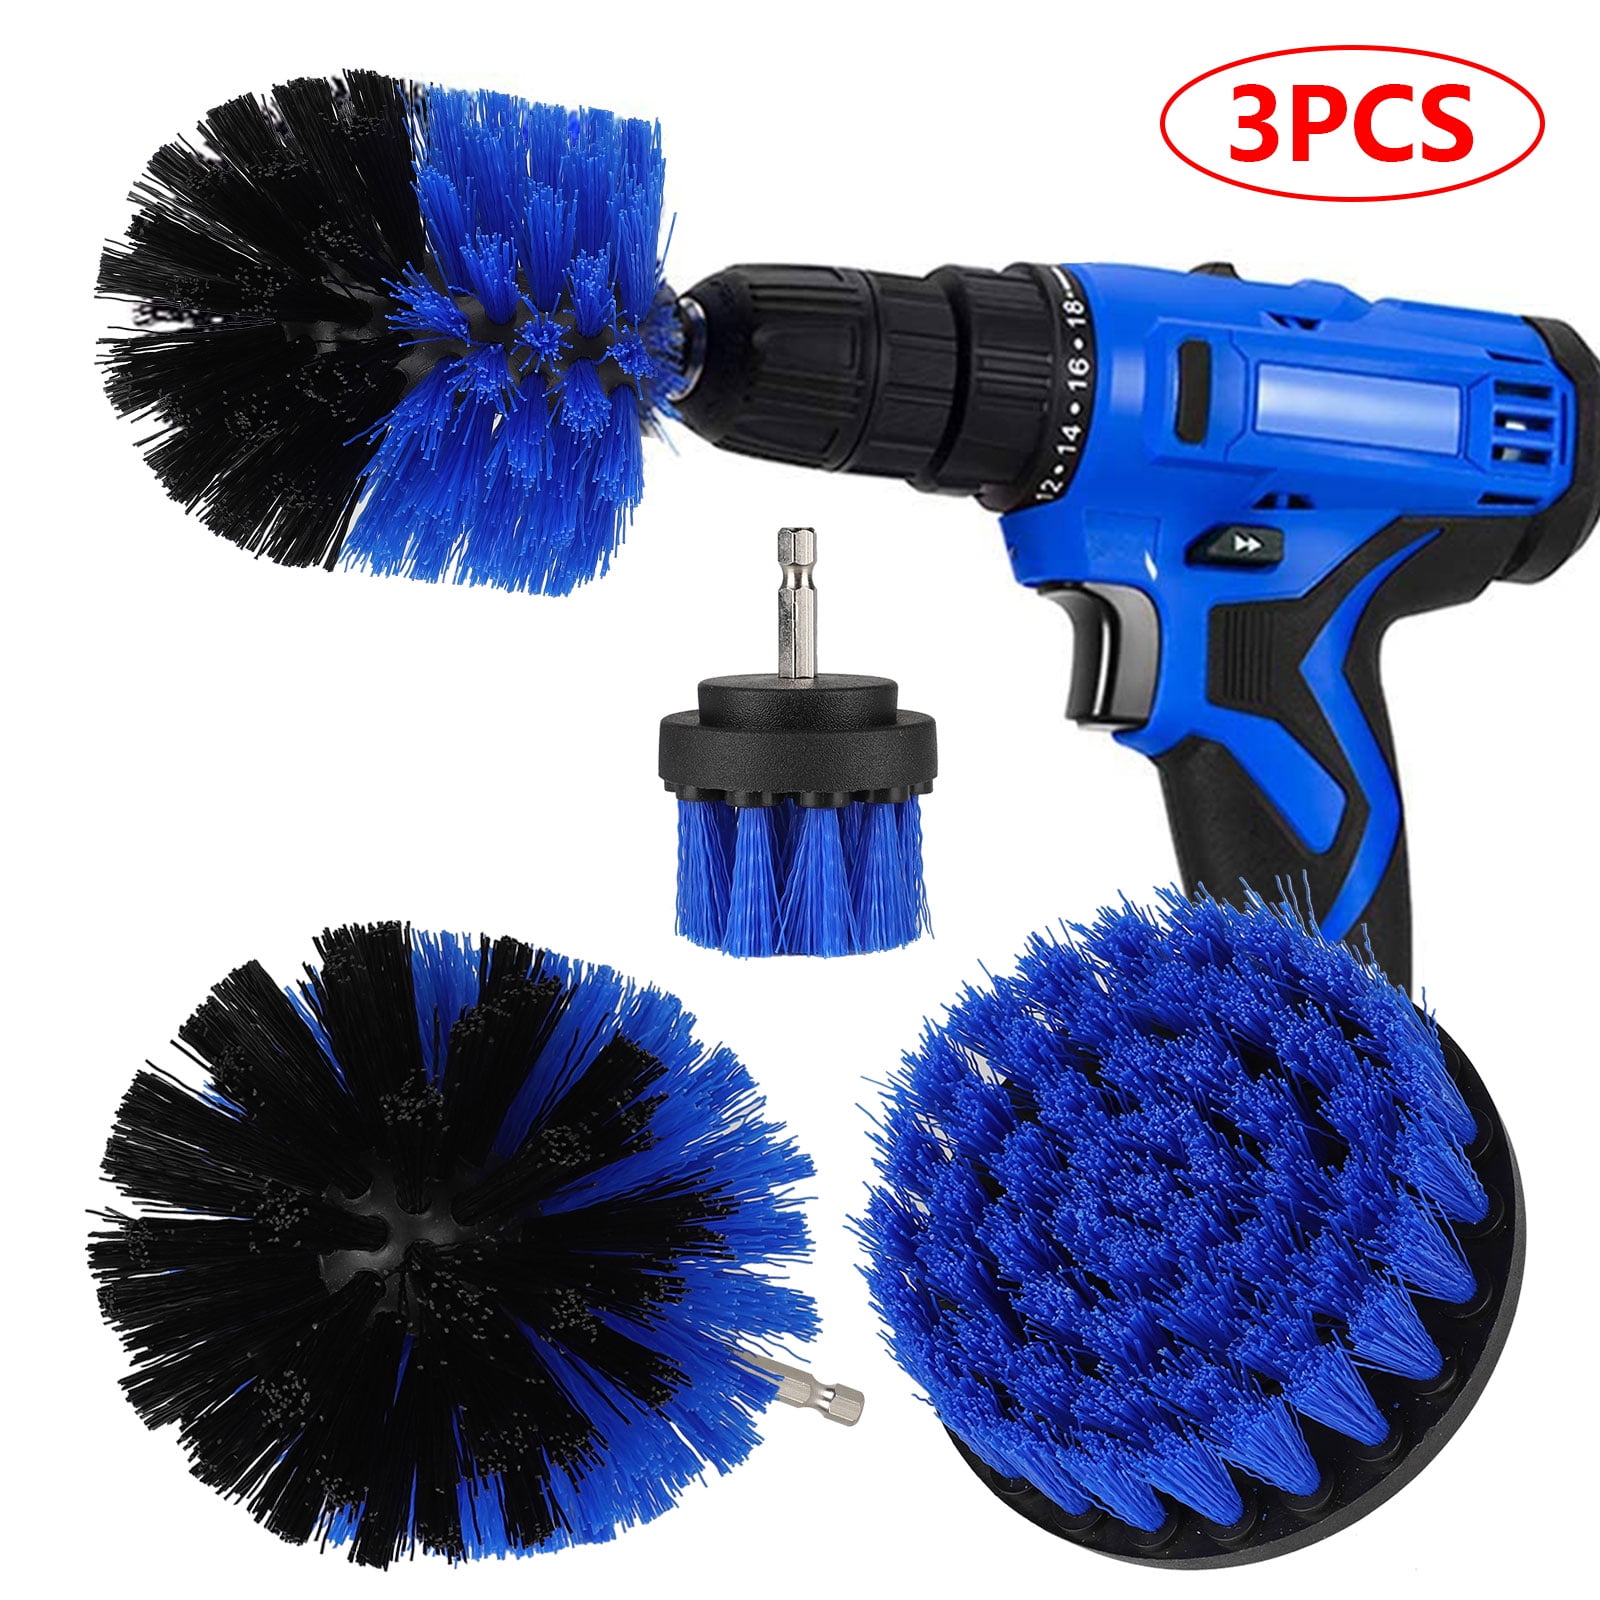 Drillbrush Grout Cleaner Brush Kit, Bathroom Drill Brush Attachment Set,  Household Cleaning, Bathroom Cleaning, Y-S-E542J-QC-DB at Tractor Supply Co.